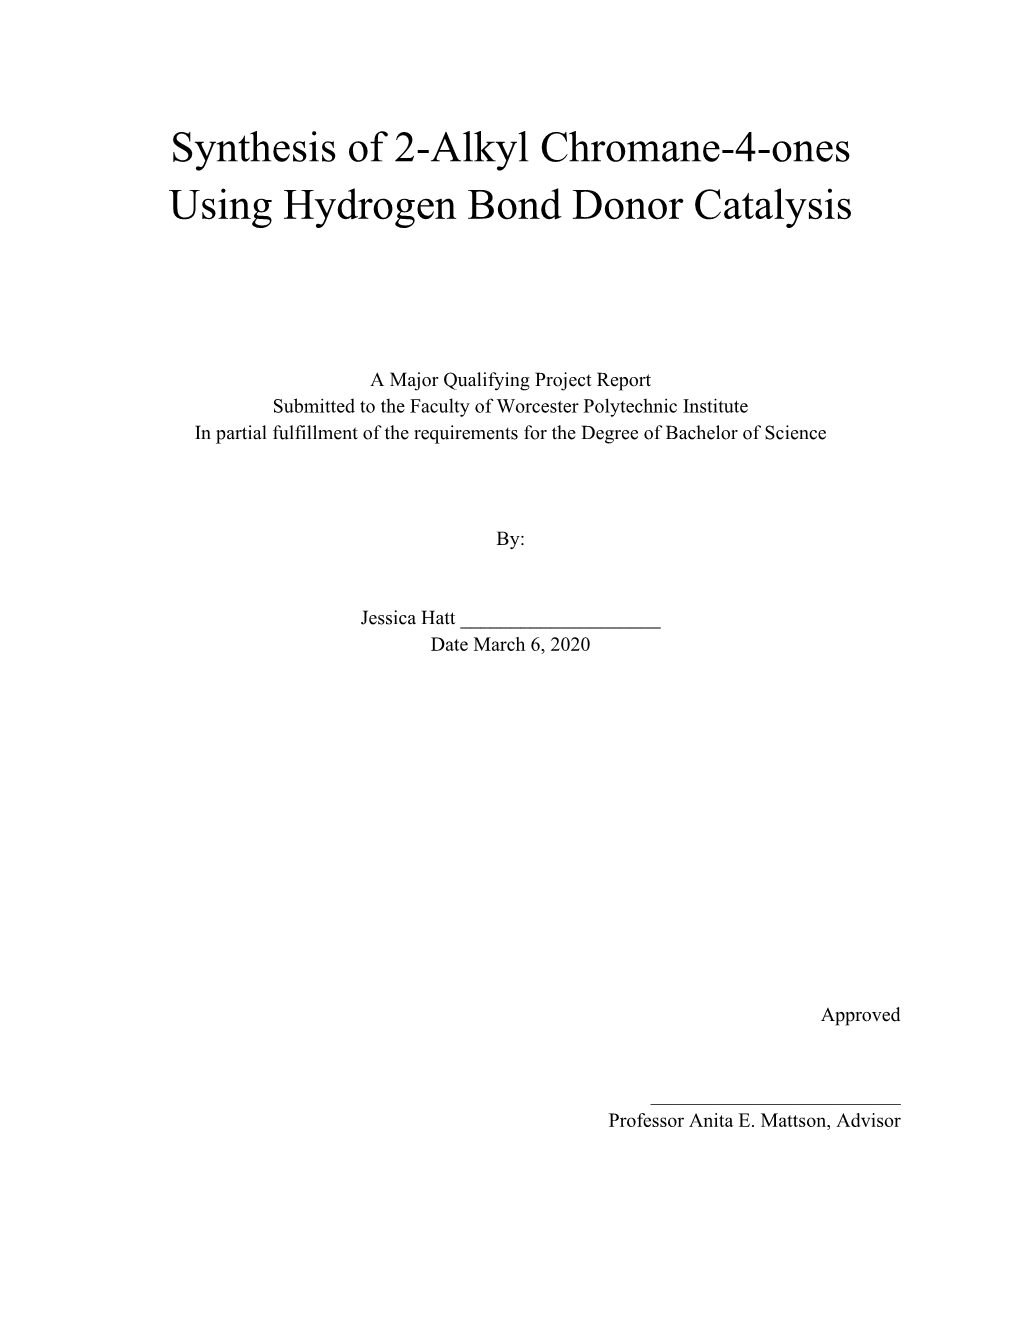 Synthesis of 2-Alkyl Chromane-4-Ones Using Hydrogen Bond Donor Catalysis